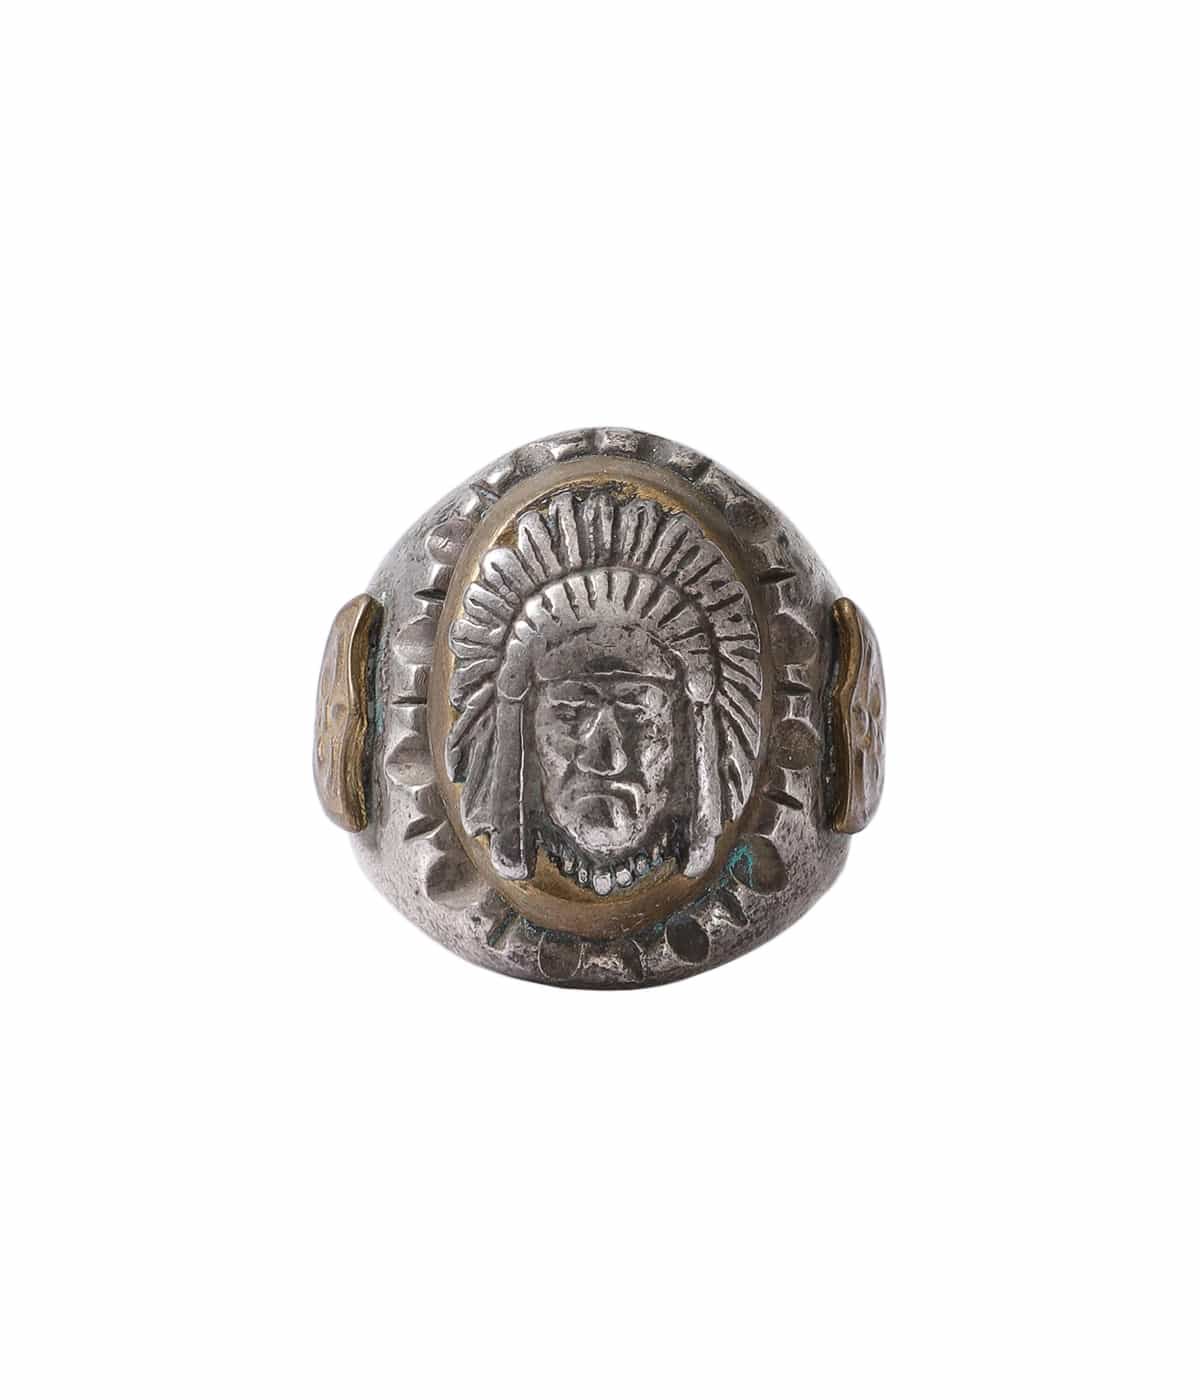 MEX RING OVAL RING  #INDIAN HEAD2